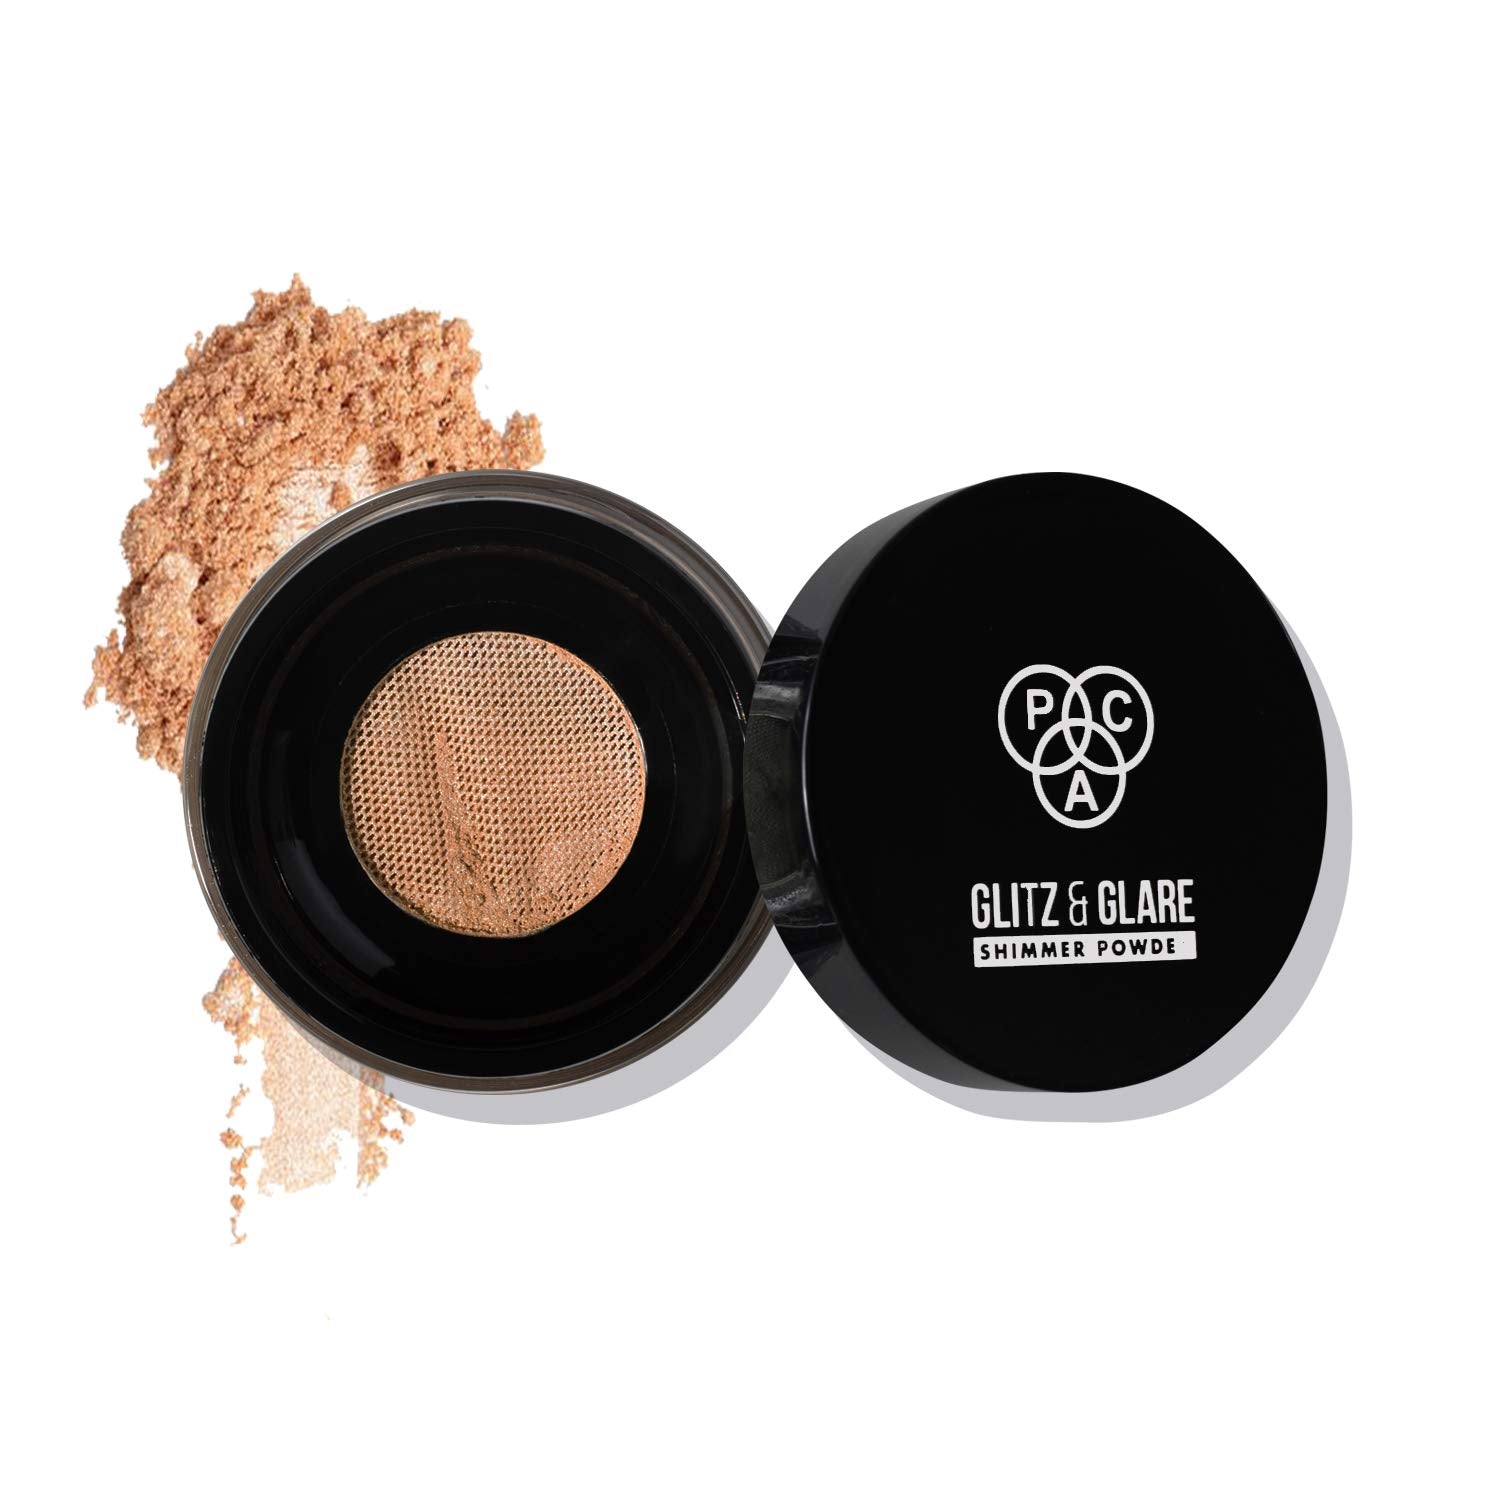 PAC Glitz & Glare Shimmer Powder - 02 (Frosted) PAC